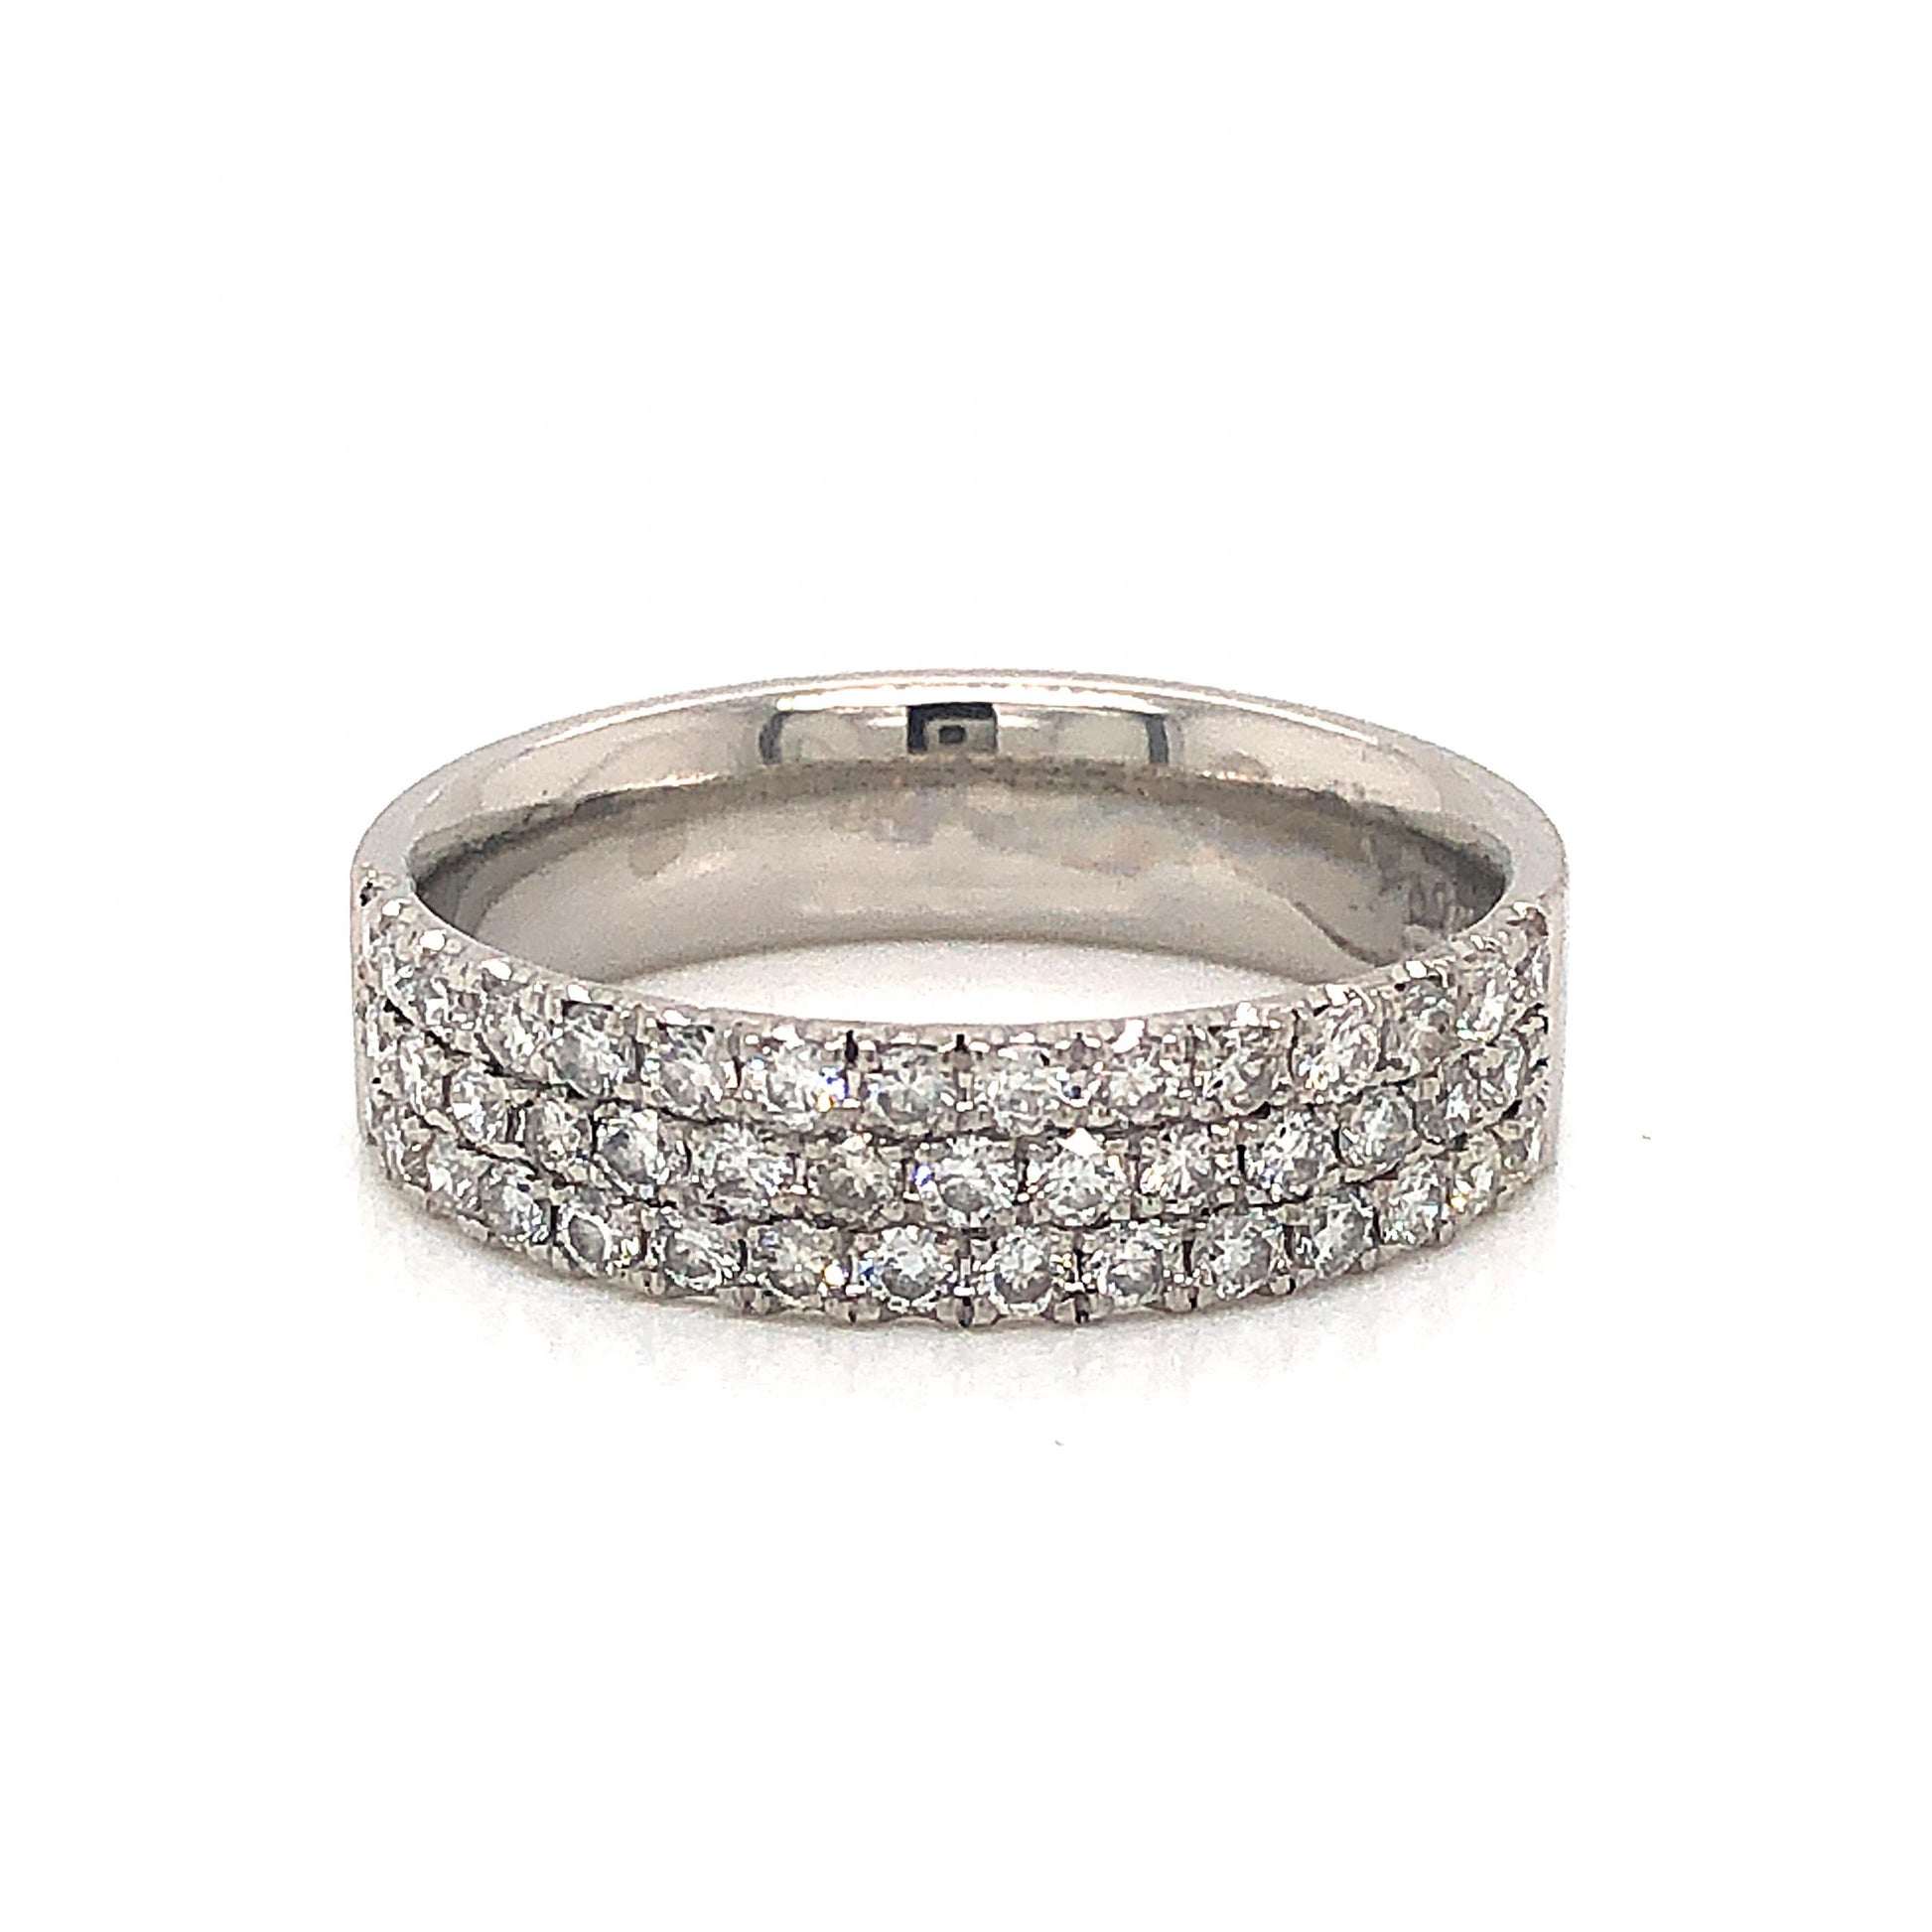 5mm Pave Diamond Stacking Band in PlatinumComposition: PlatinumRing Size: 7Total Diamond Weight: .66 ctTotal Gram Weight: 7.0 gInscription: PLAT m Sarosi